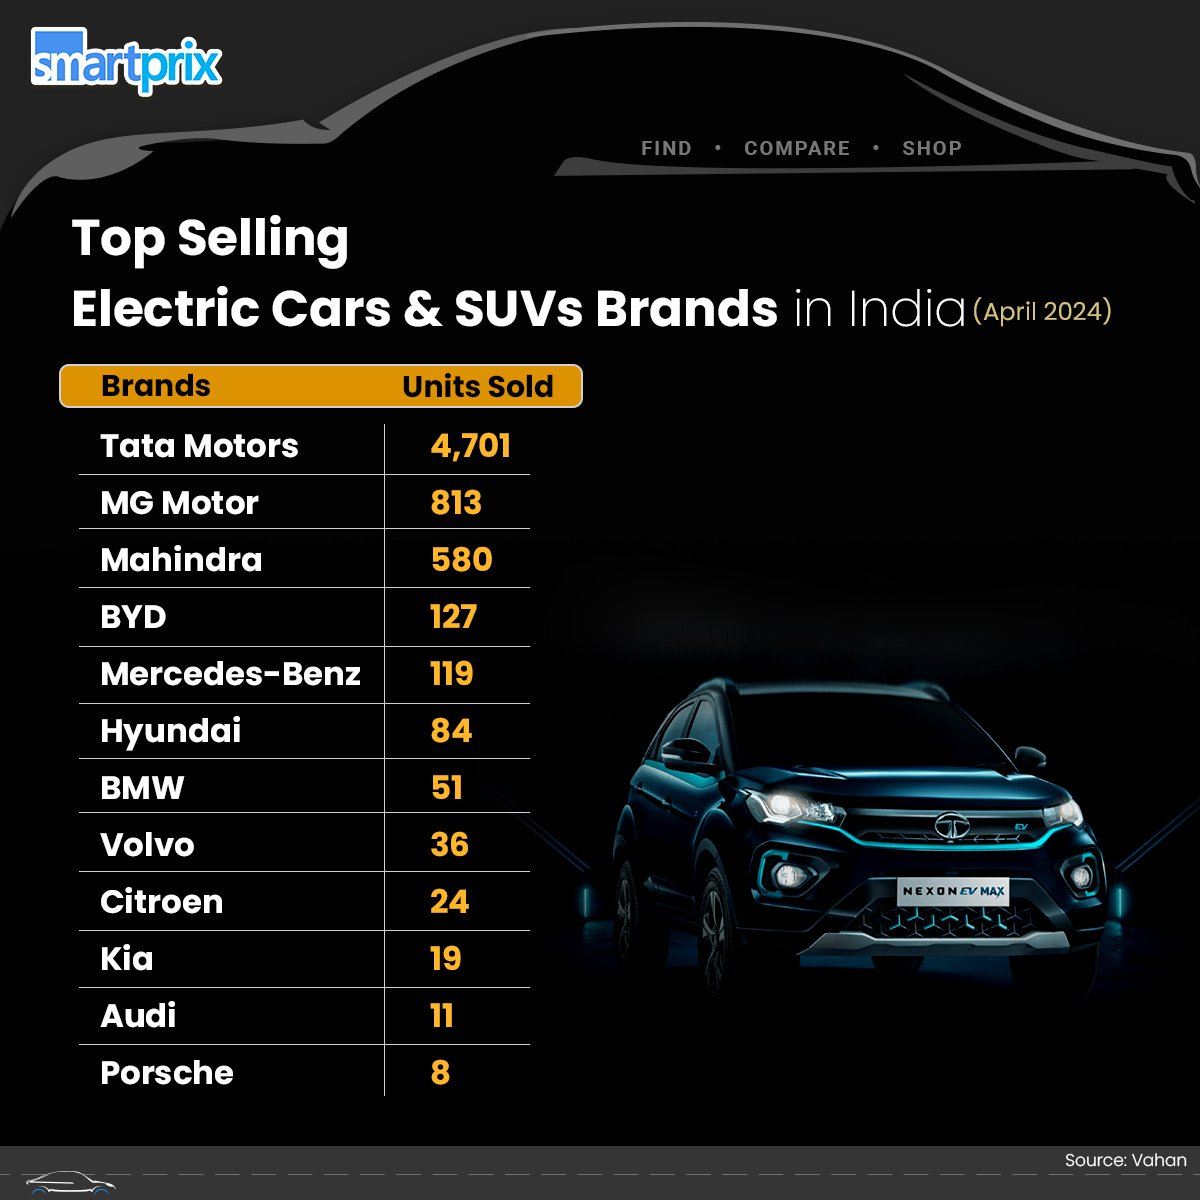 Tata Motors dominates India's electric four-wheeler market with over 70% market share

Which one is your favorite?
#EV #Cars #SUV #ElectricCar #TataMotors #Nexon